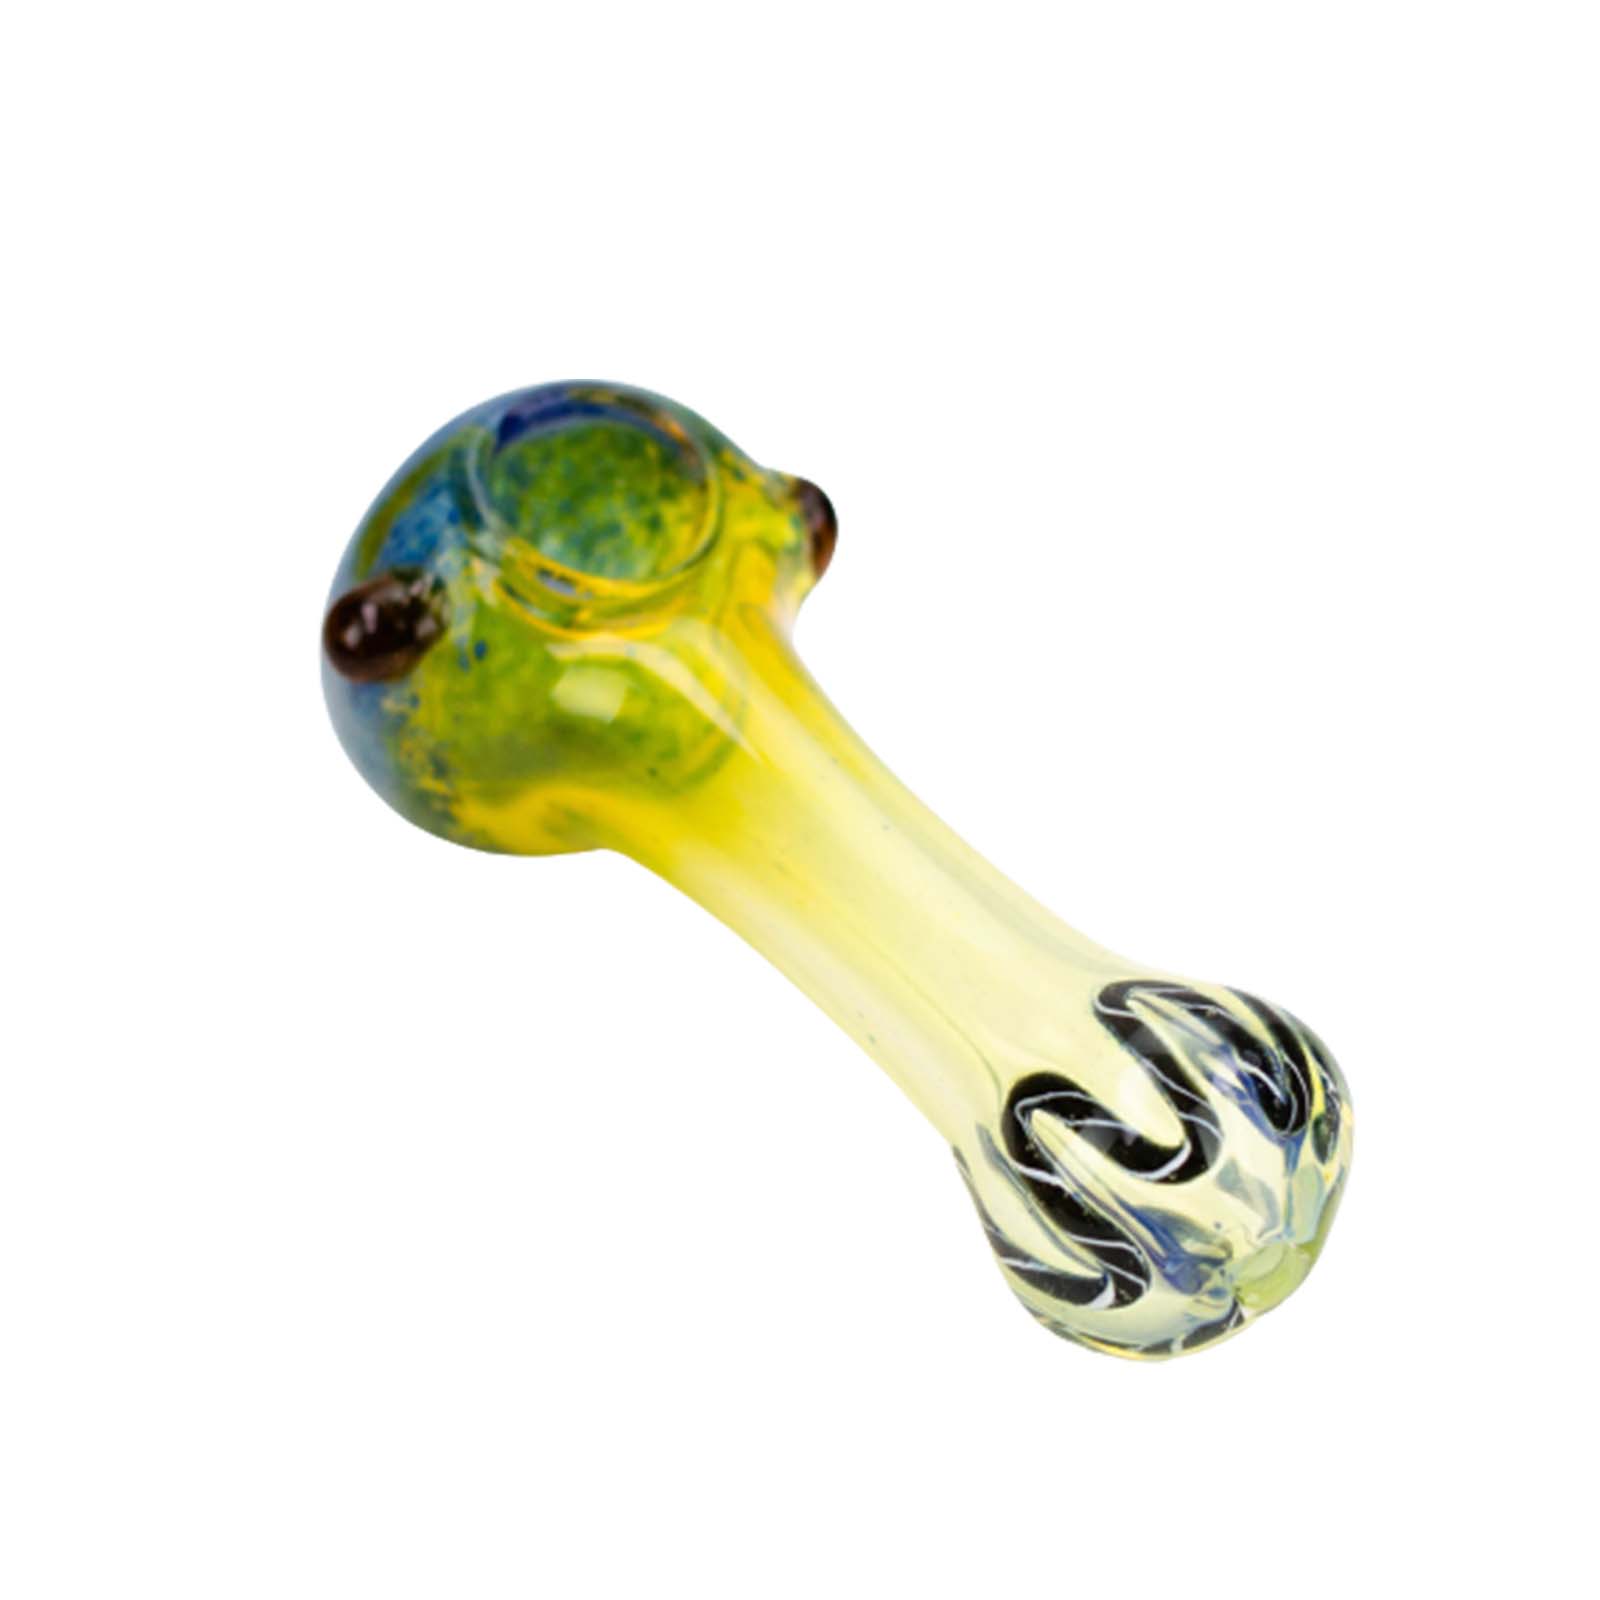 4.5" Soft Glass Hand Pipes - Pack of 2